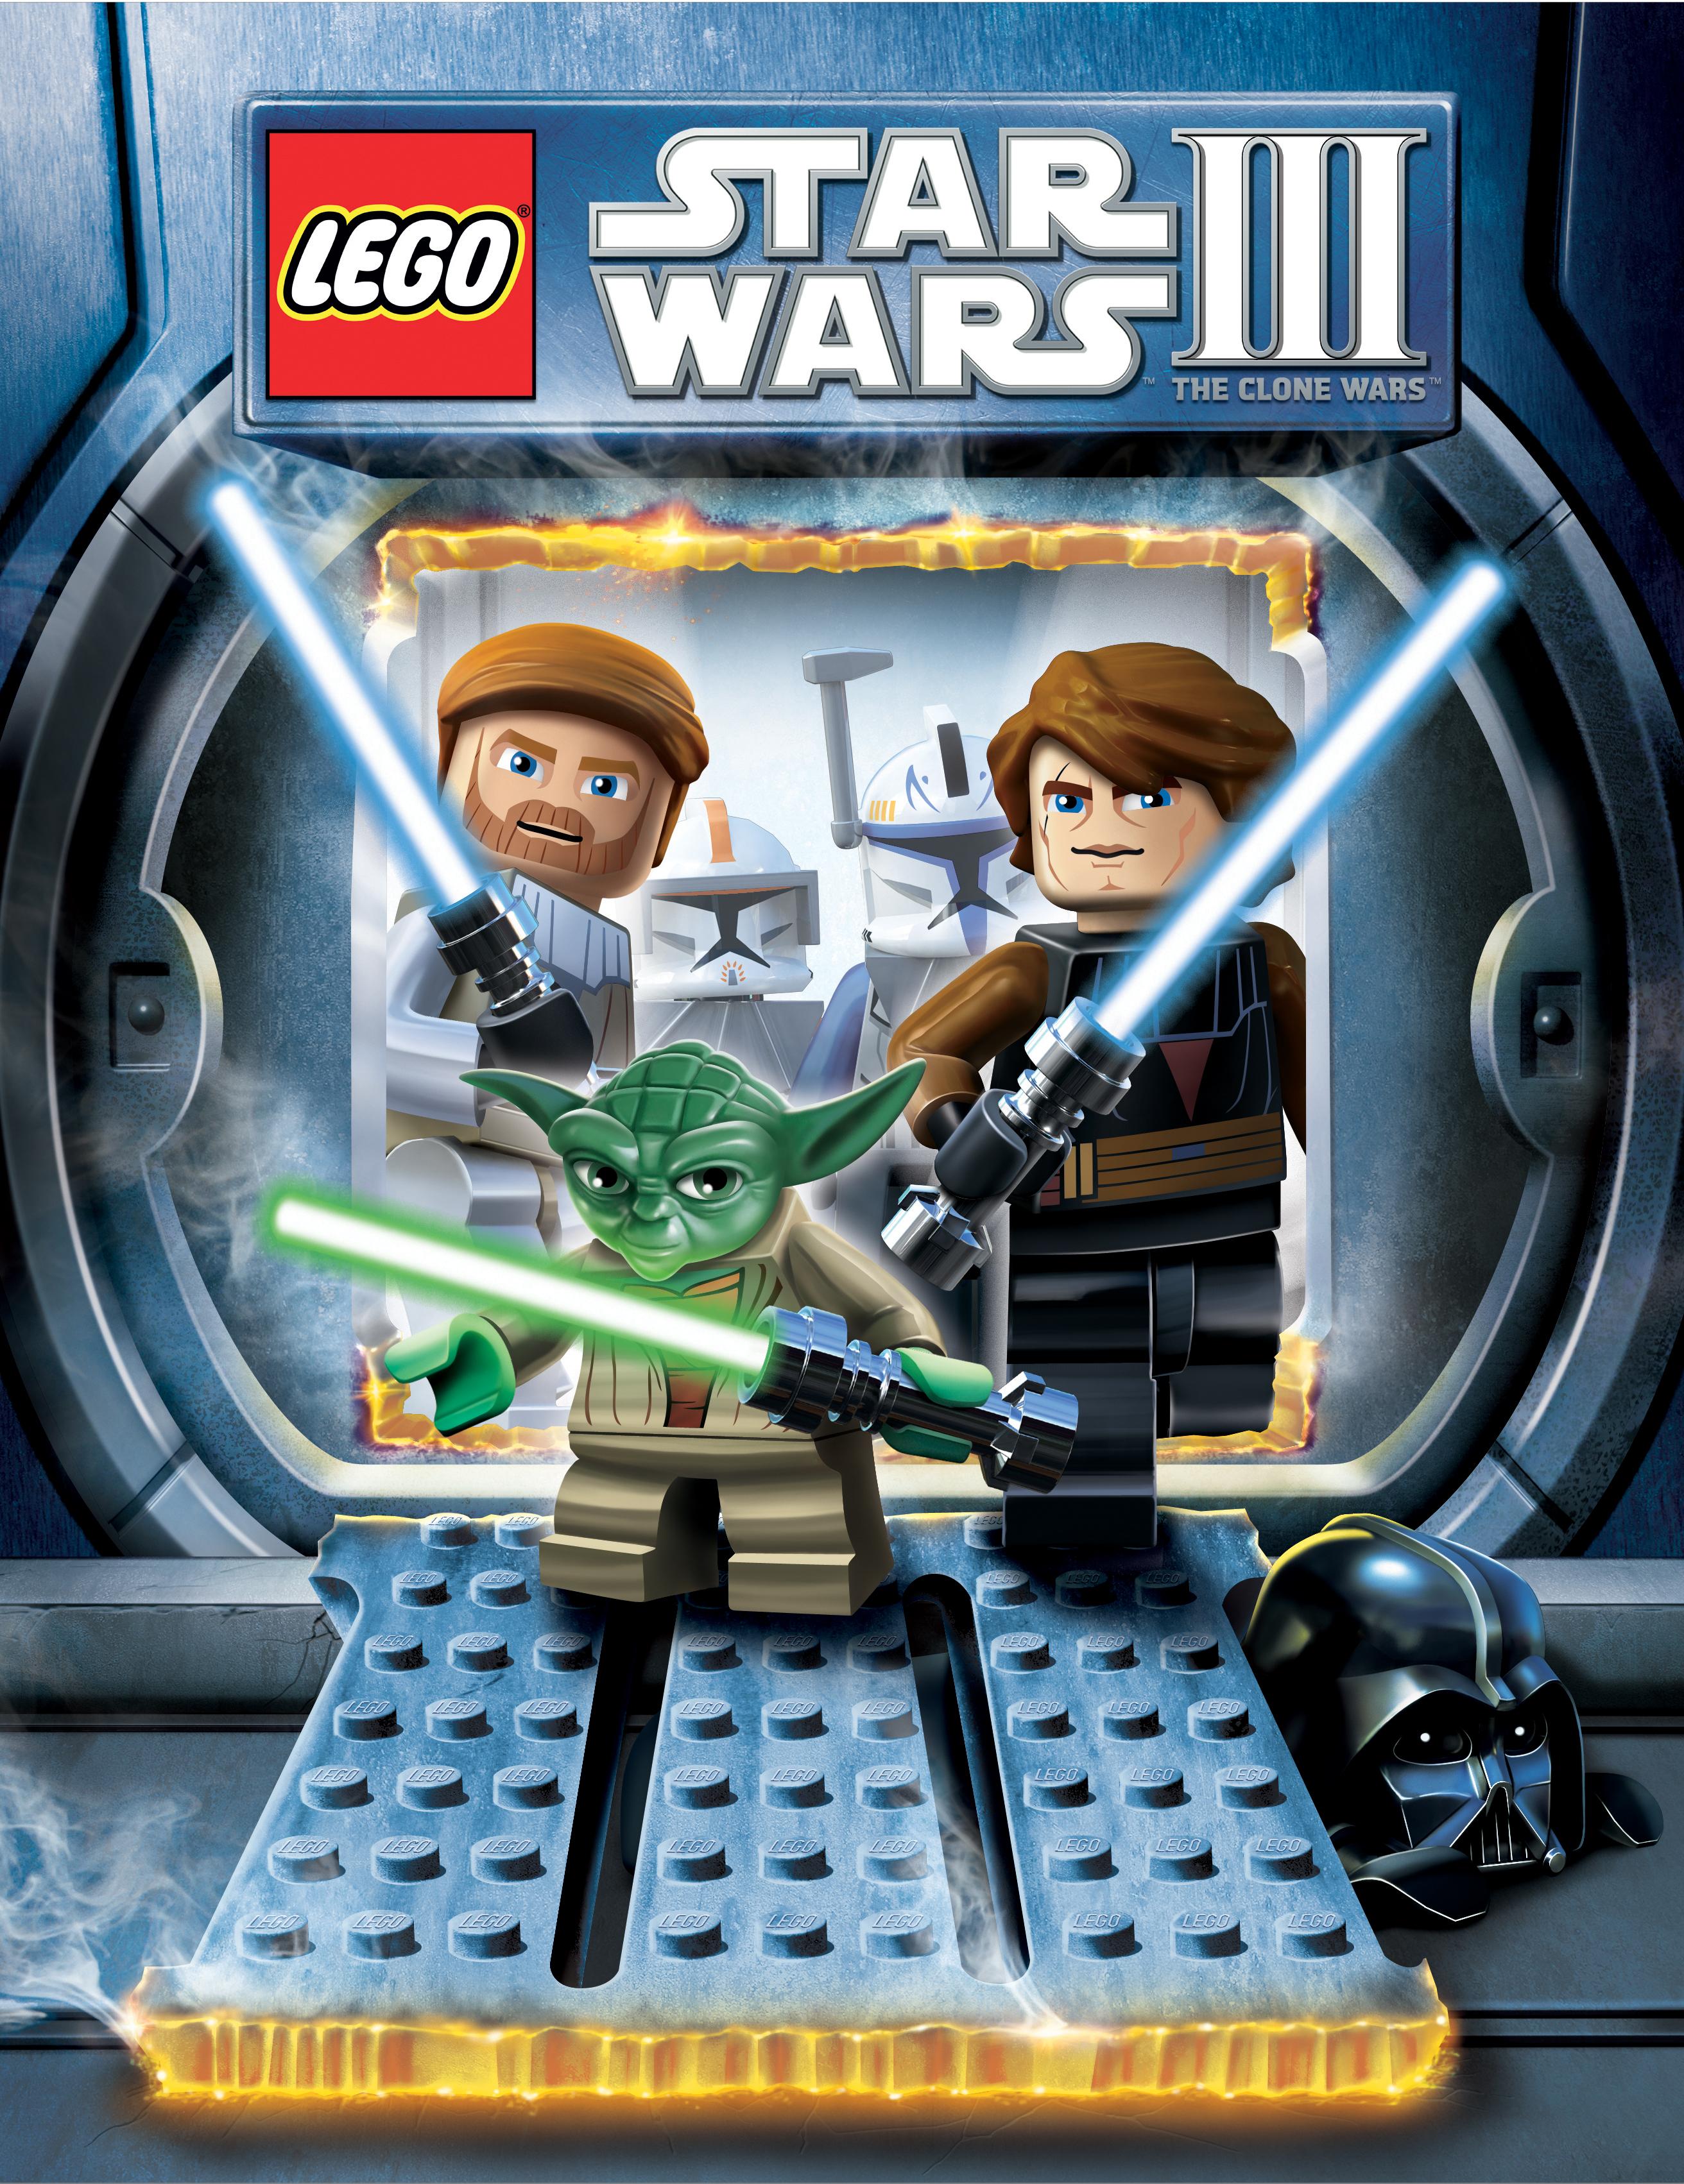 Gallery For > Lego Star Wars 3 Wallpaper